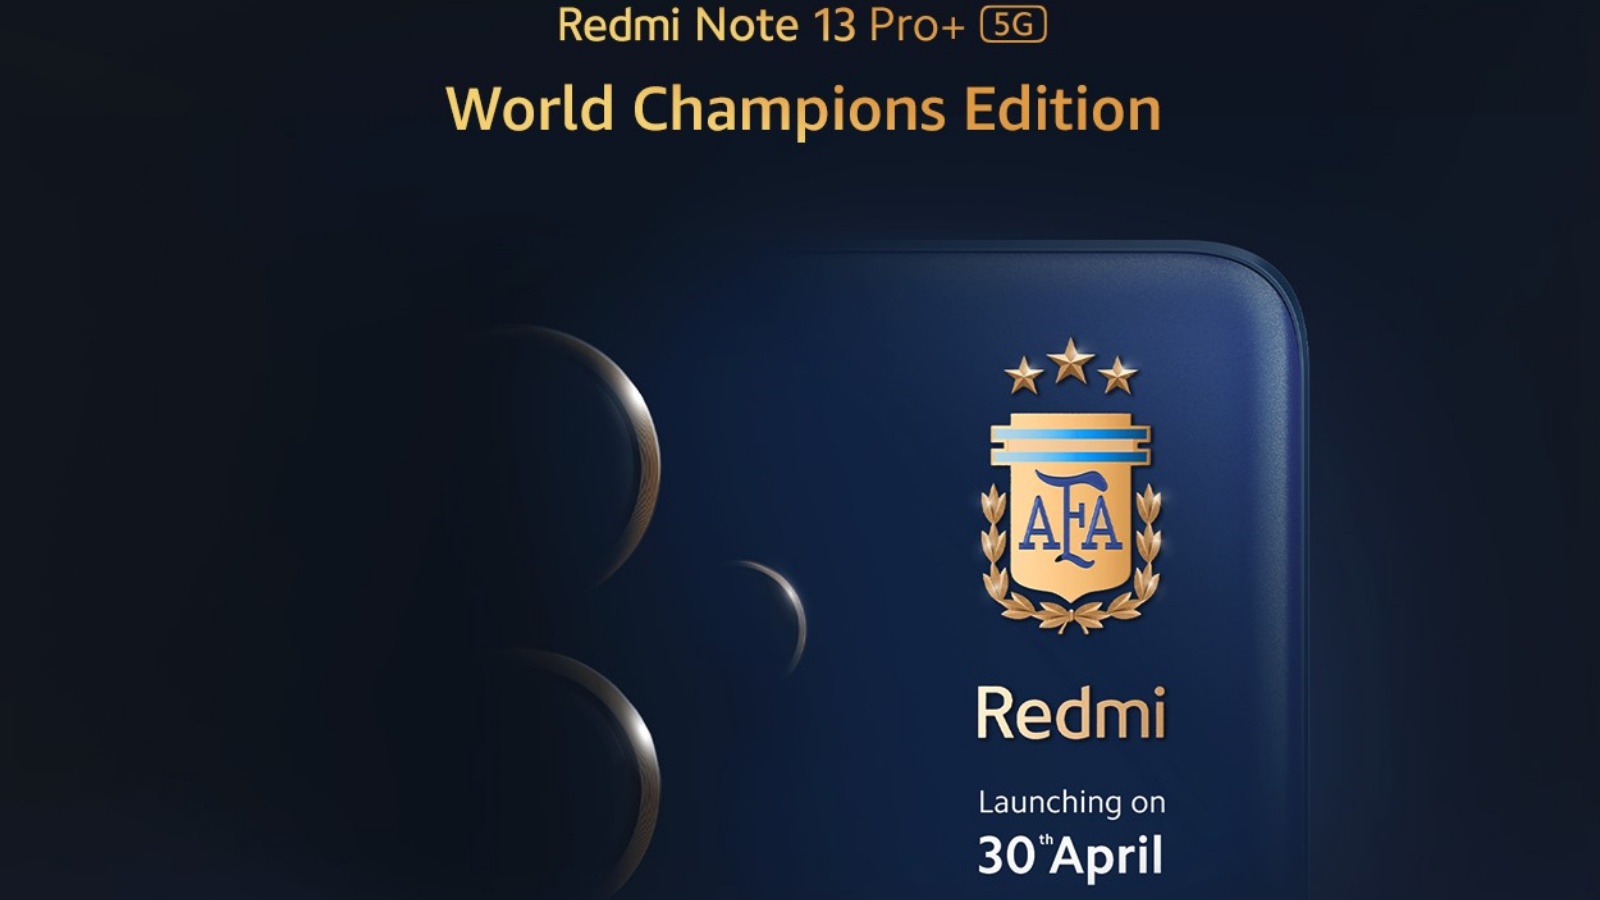 android, redmi to launch note 13 pro plus world champions edition in india on april 30